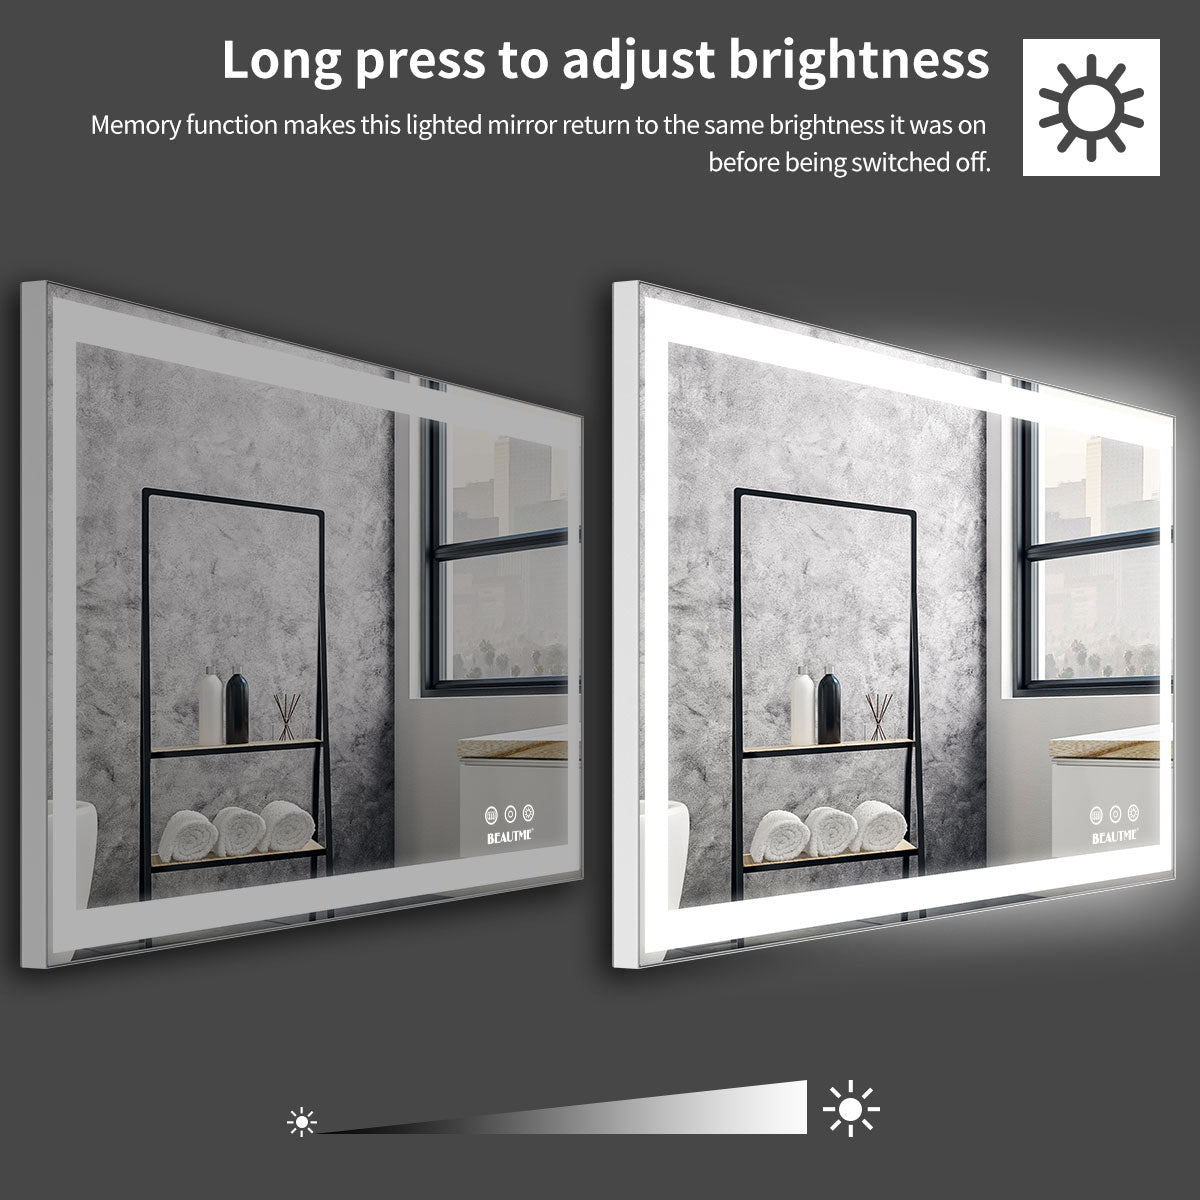 48x36 inch LED Bathroom Vanity Mirror Wall Mounted Adjustable White/Warm/Natural Lights Anti-Fog Touch Switch with Memory Modern Smart Large Bathroom Mirrors